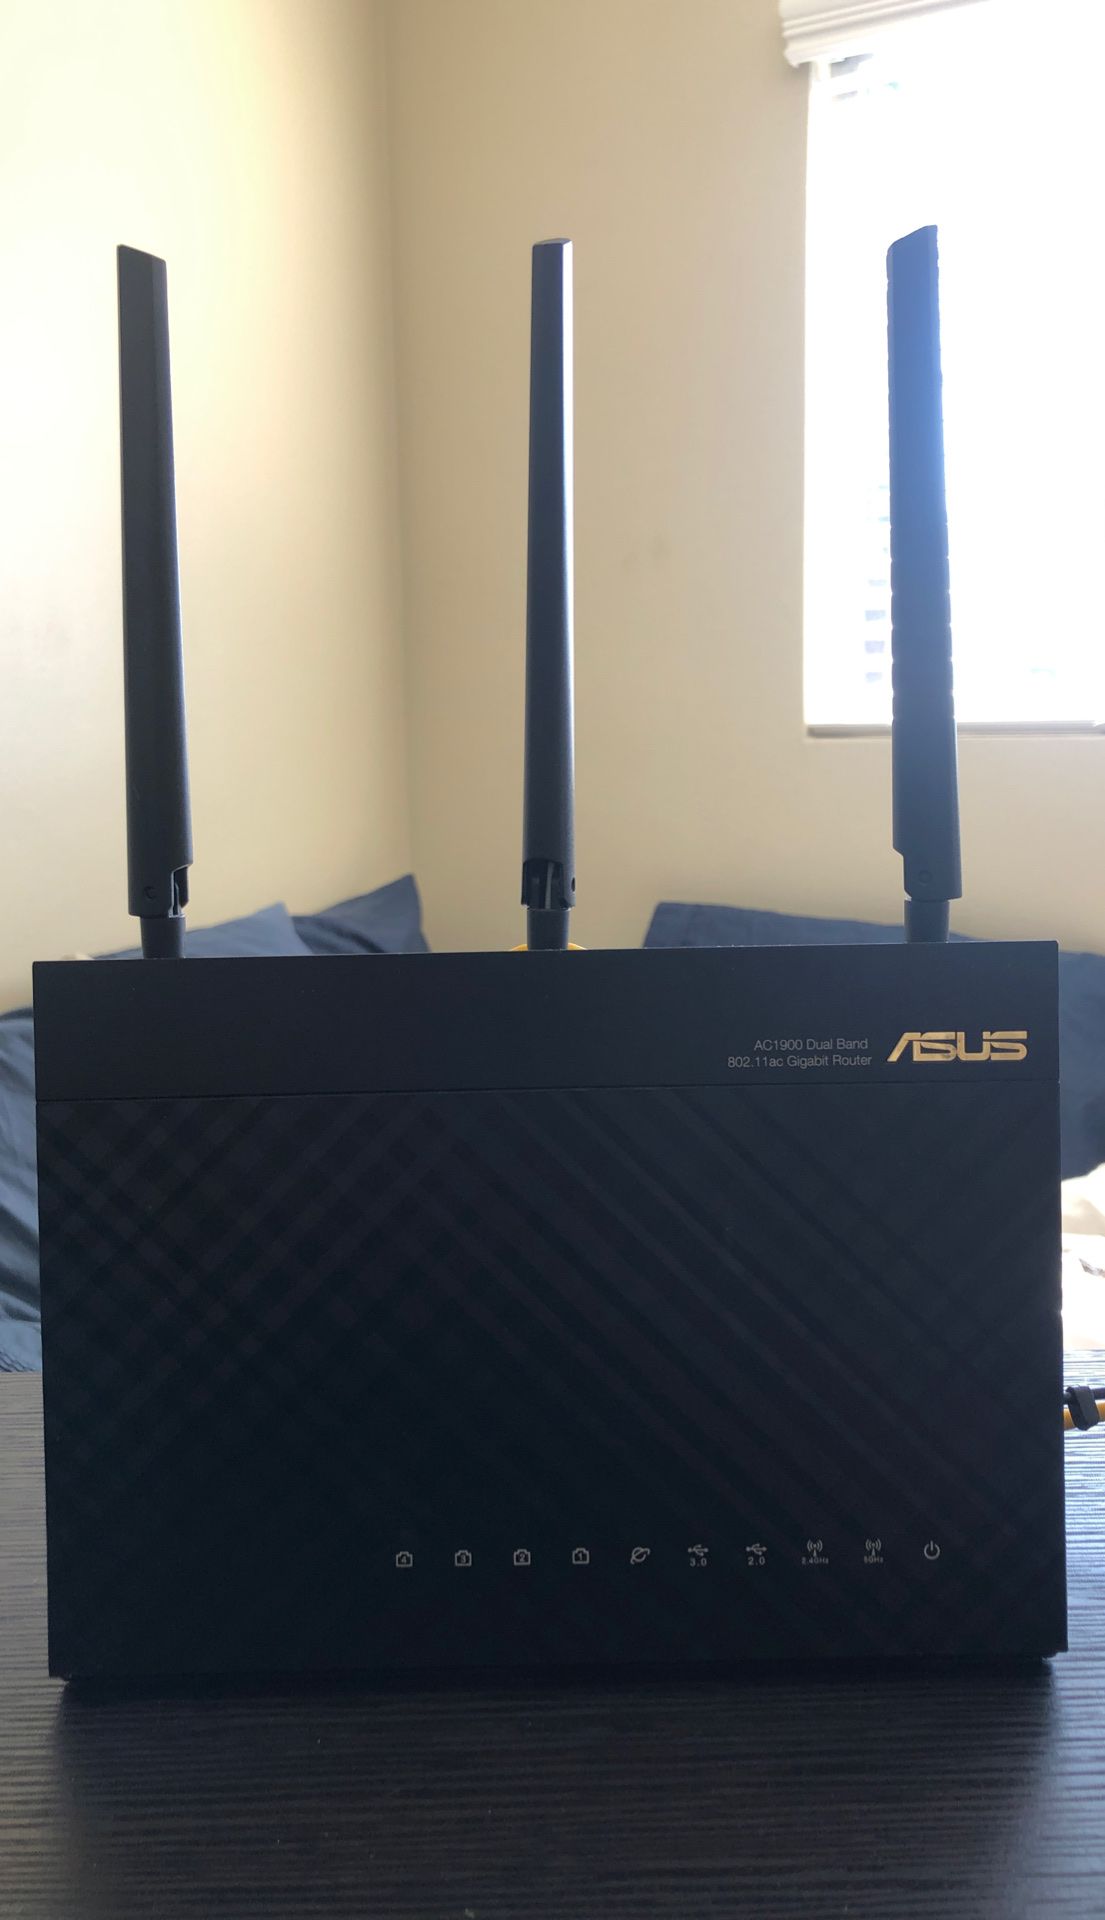 Asus dual band gigabit wireless router